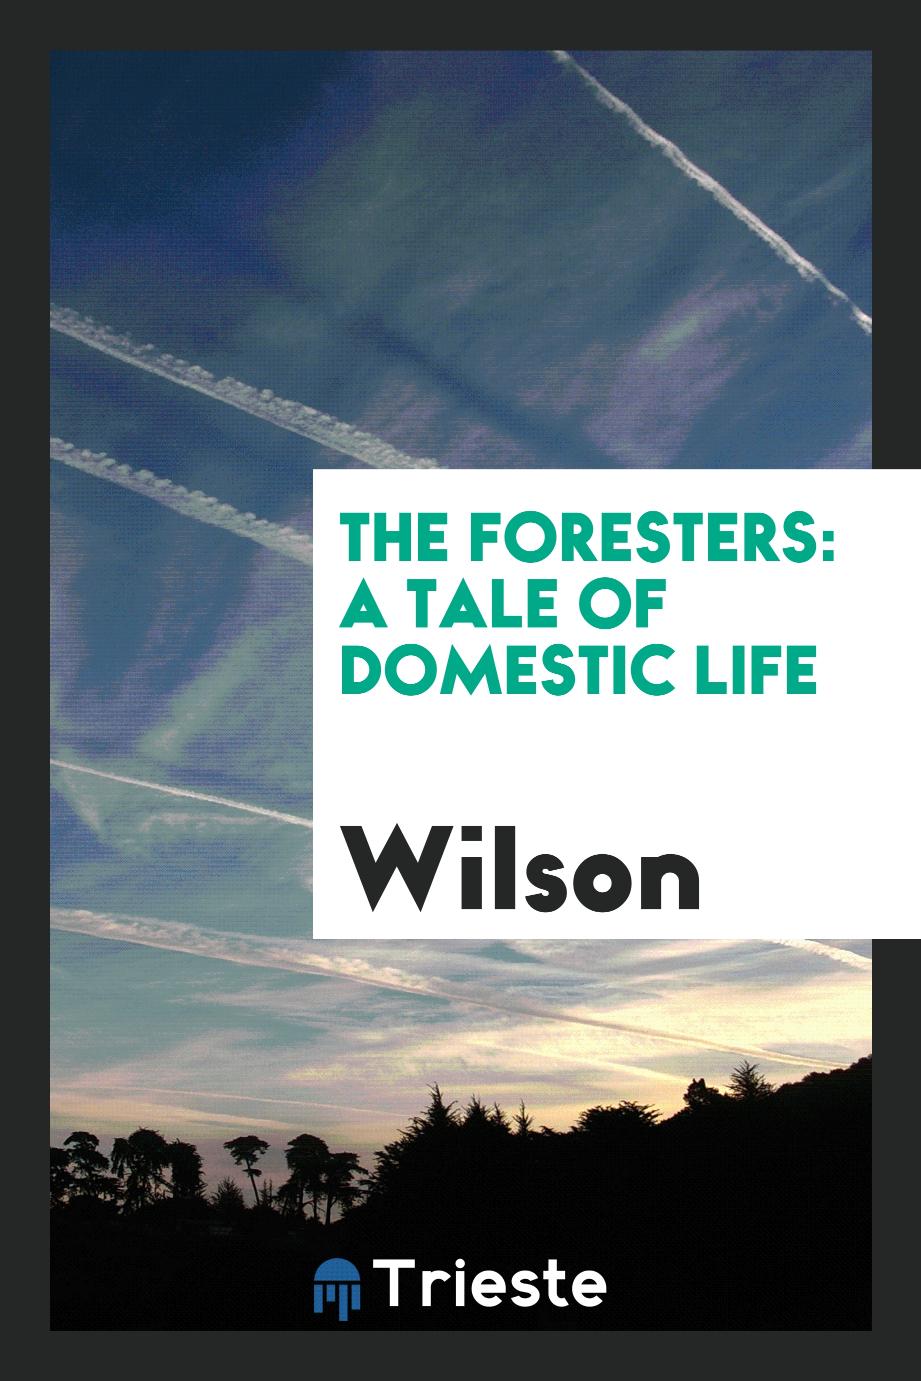 The Foresters: a tale of domestic life